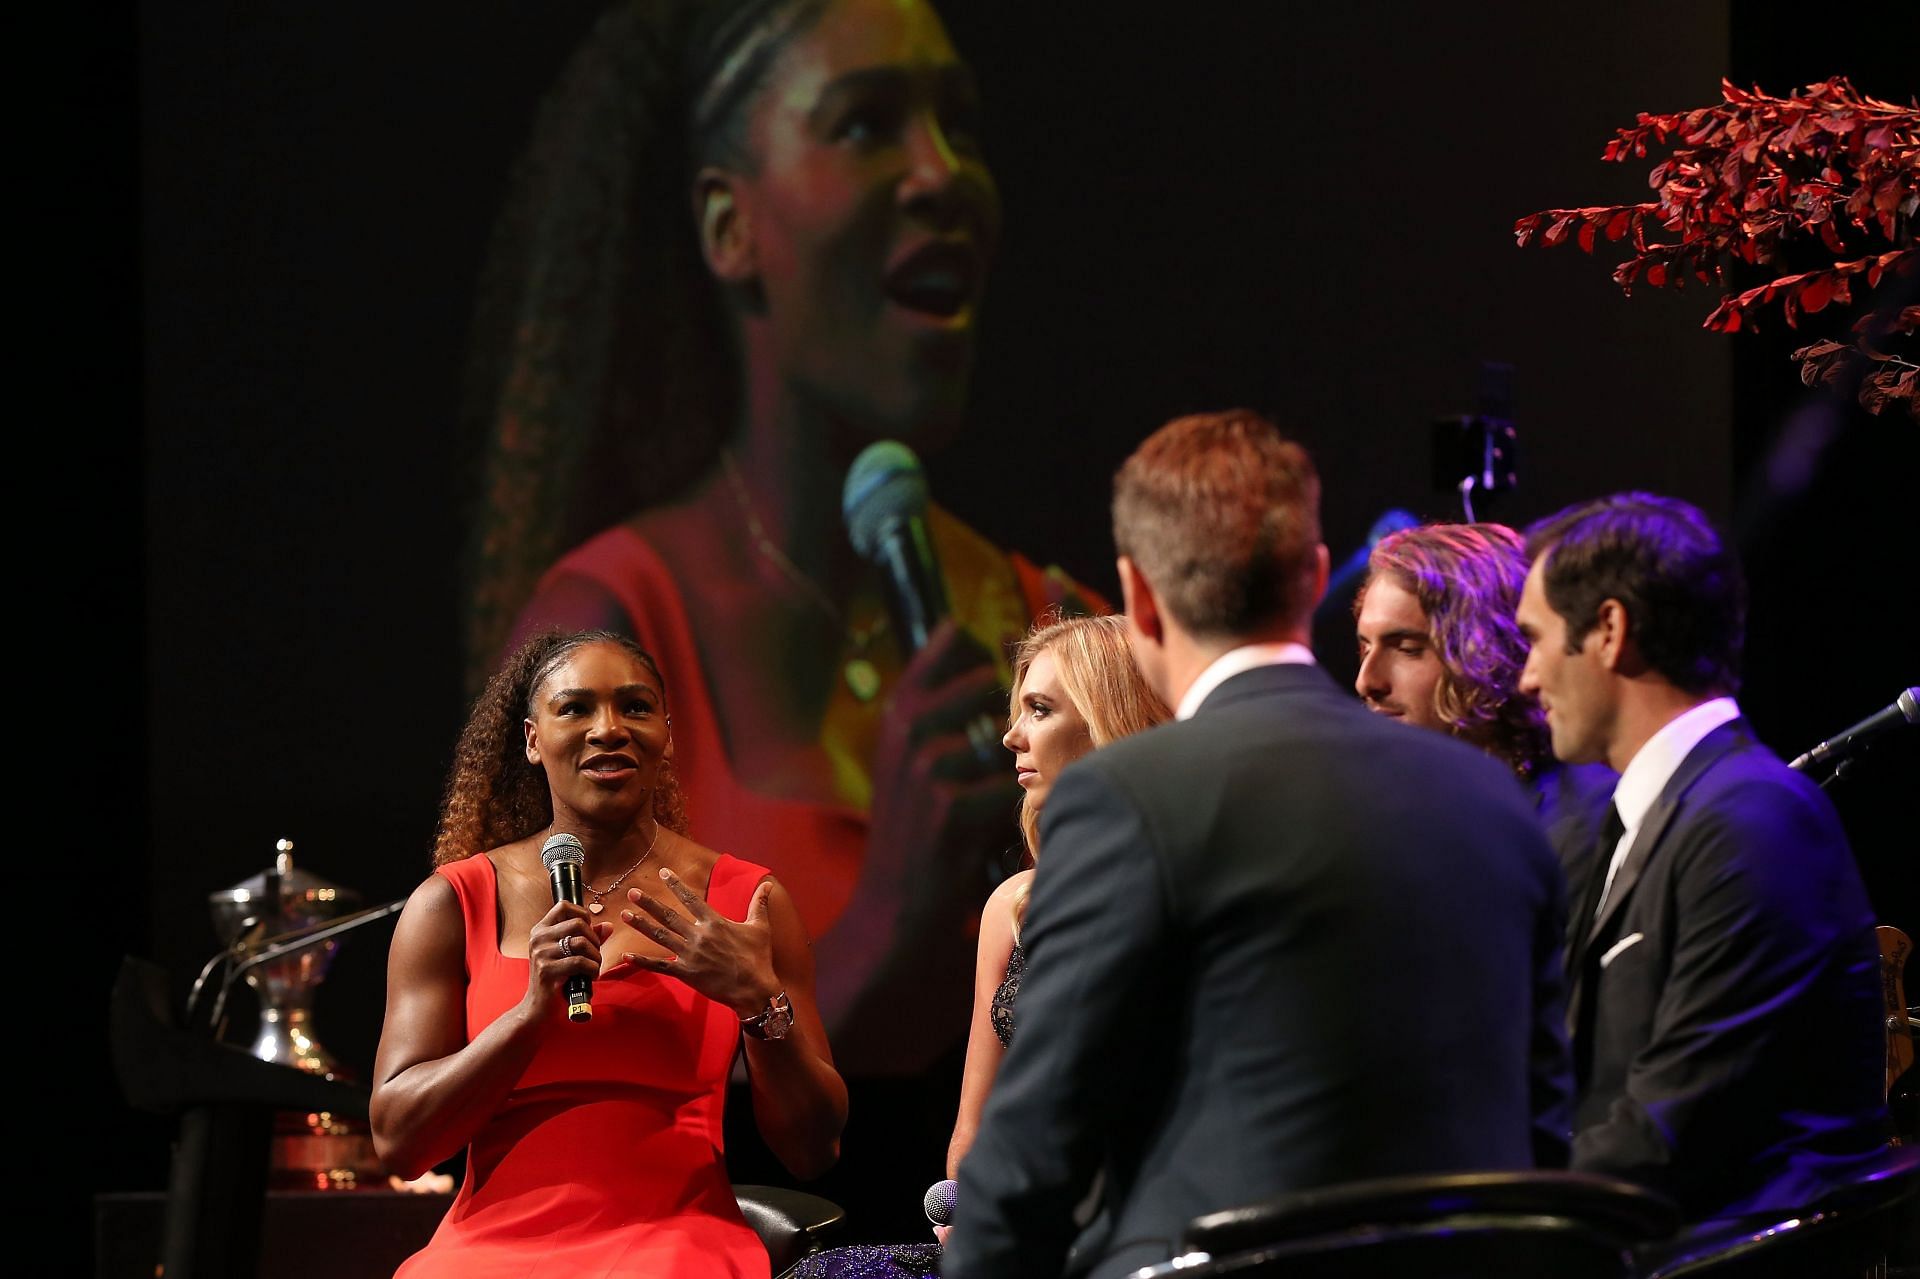 Tennis players interact during a conference in 2018